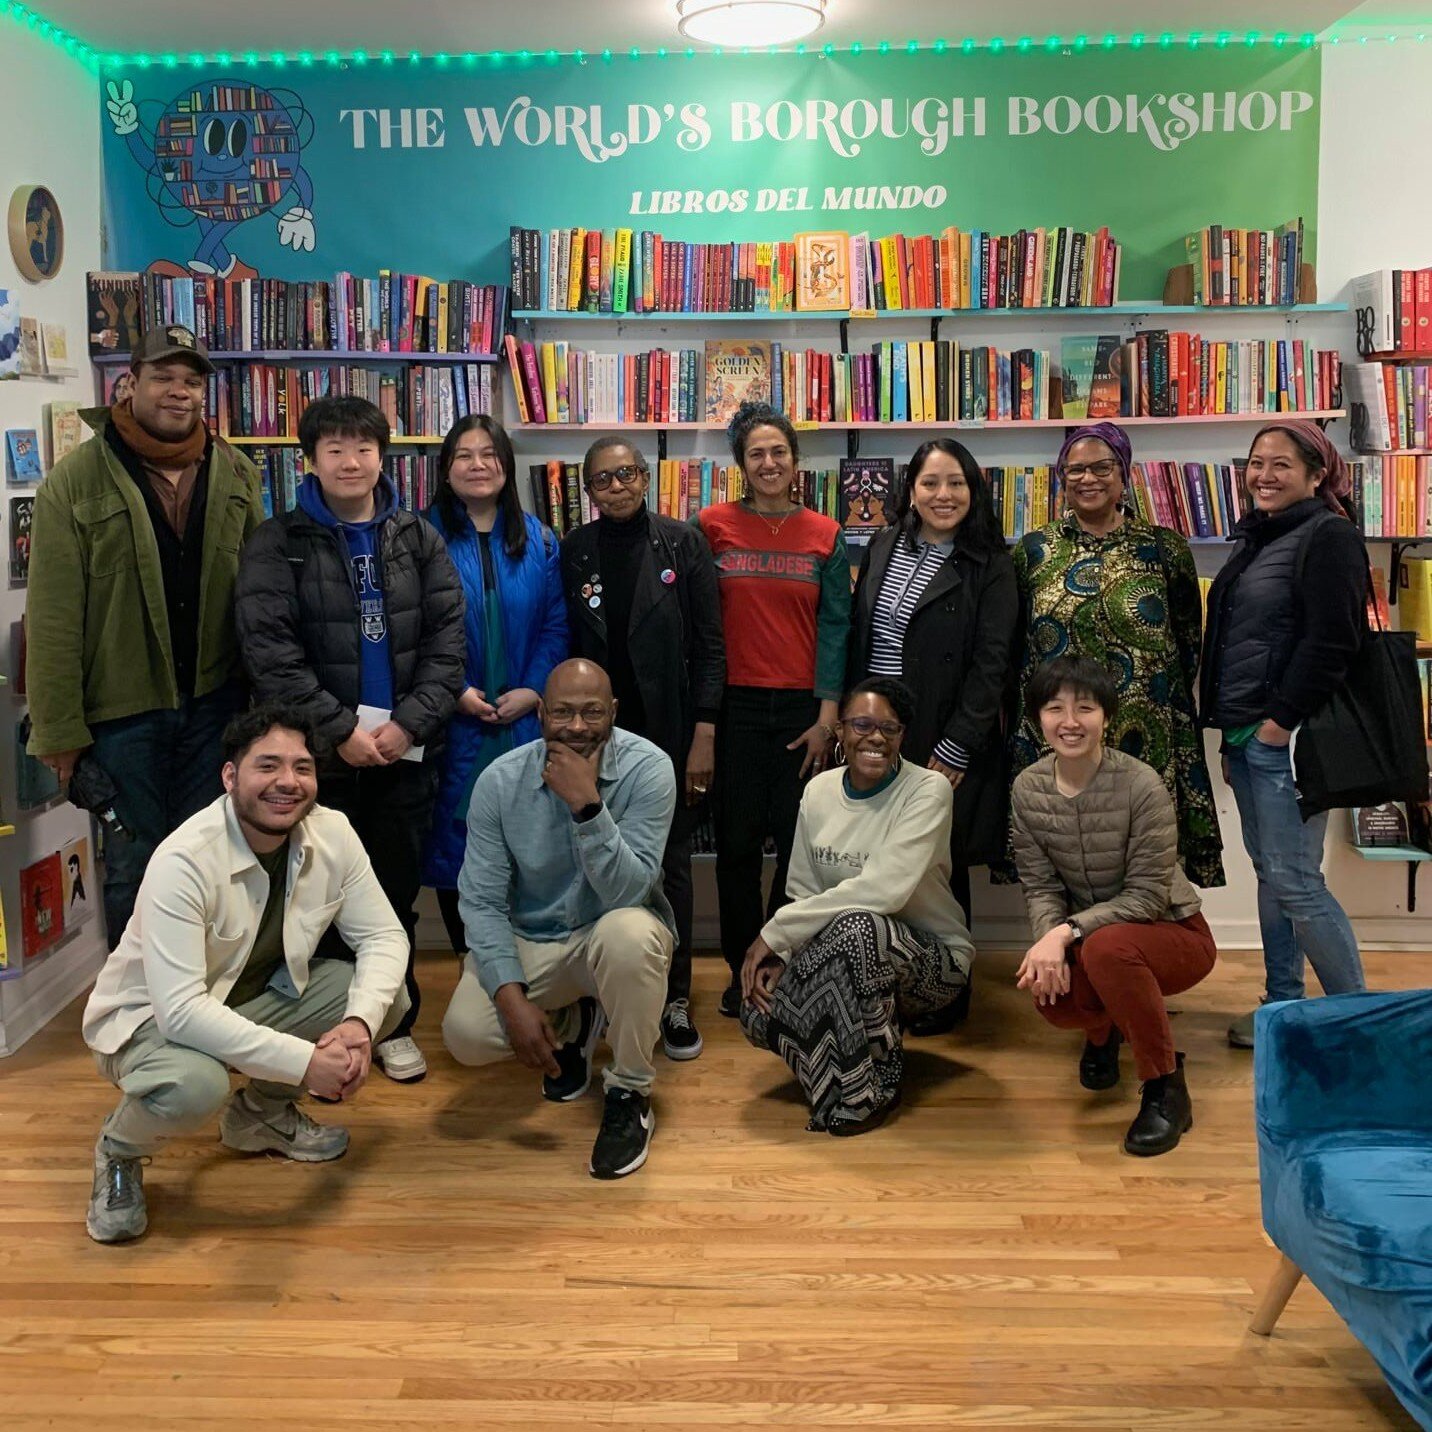 Throwback to earlier this month when we met the Memoir and Autobiographical Writing Workshop participants at the World's Borough Bookstore! The newest cohort of 8 writers were selected through a highly competitive process and they each received a ful